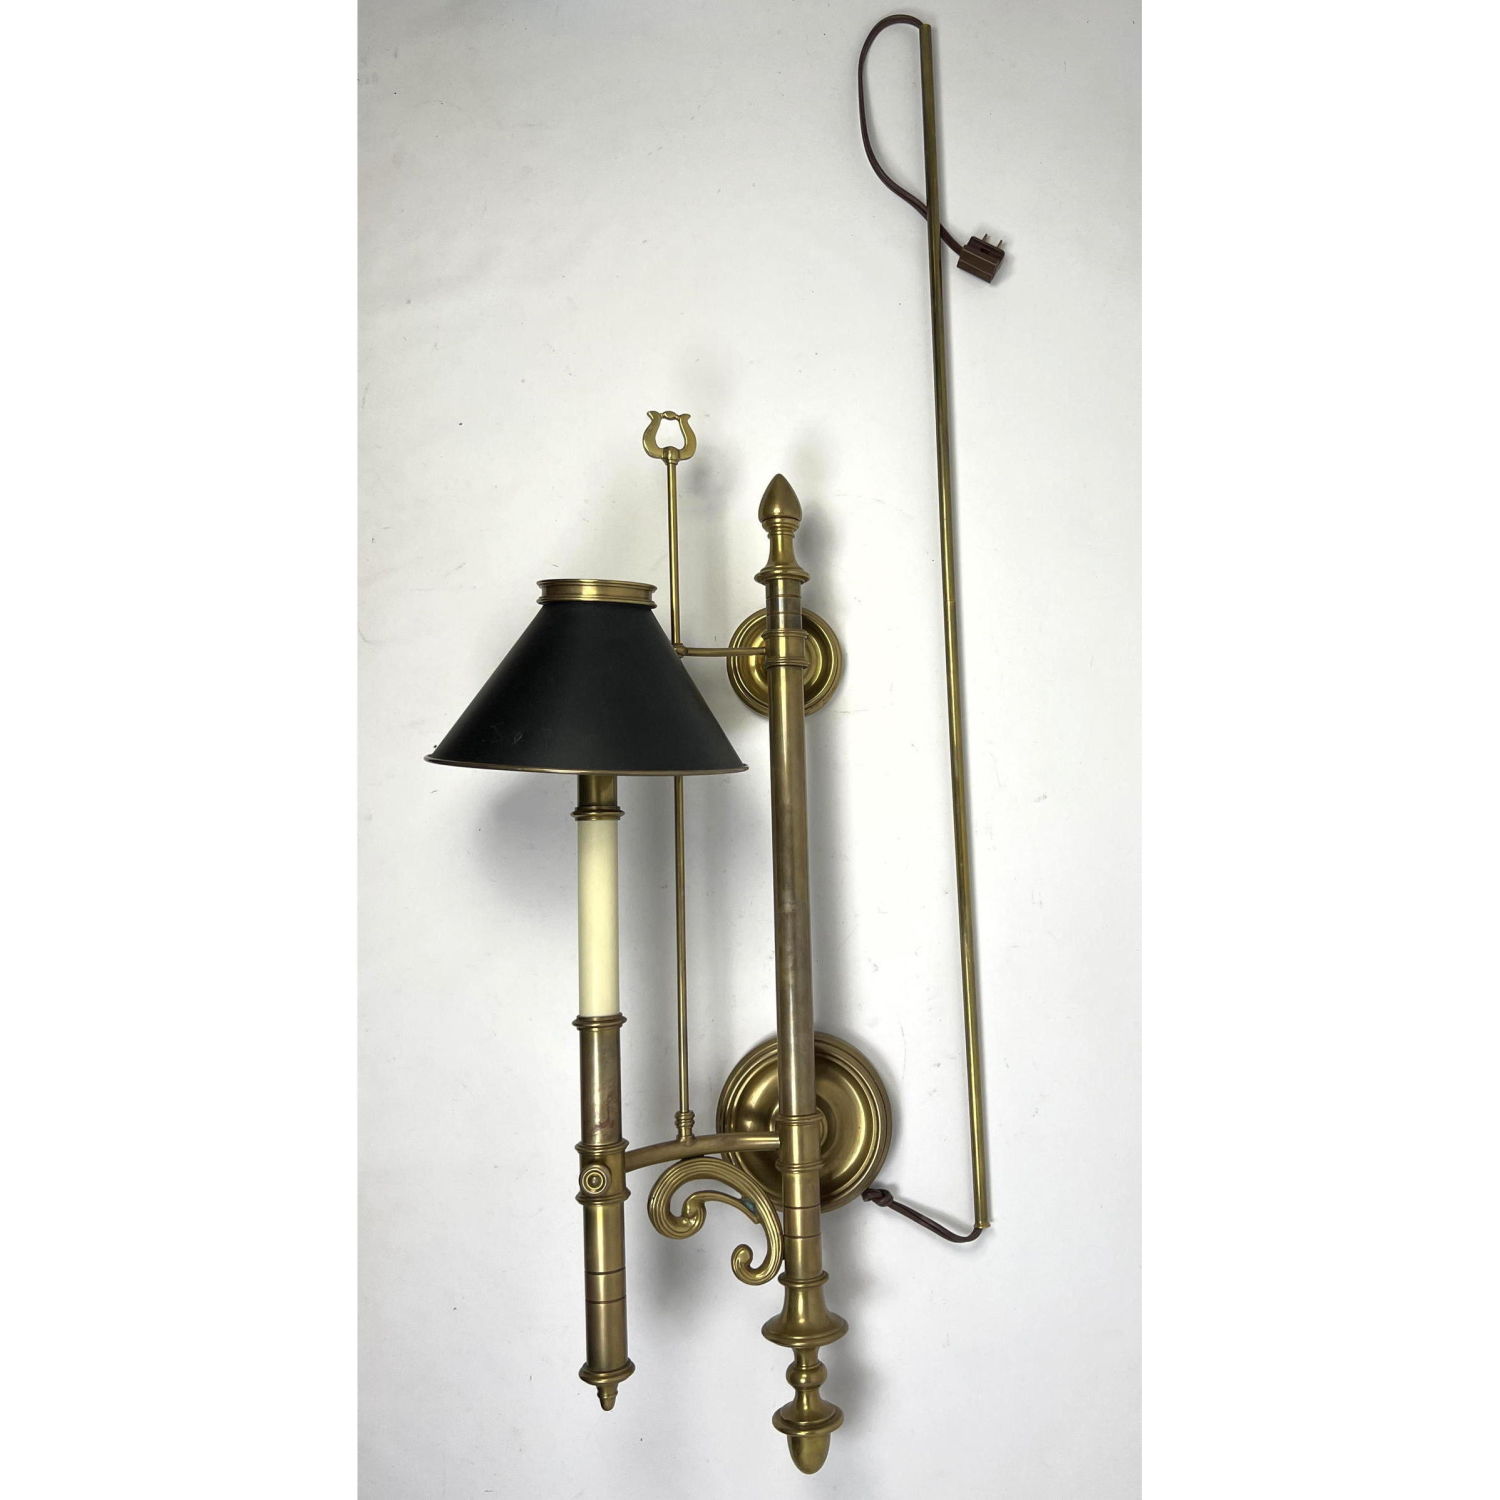 Large Decorative Brass Wall Sconce 2b9eef